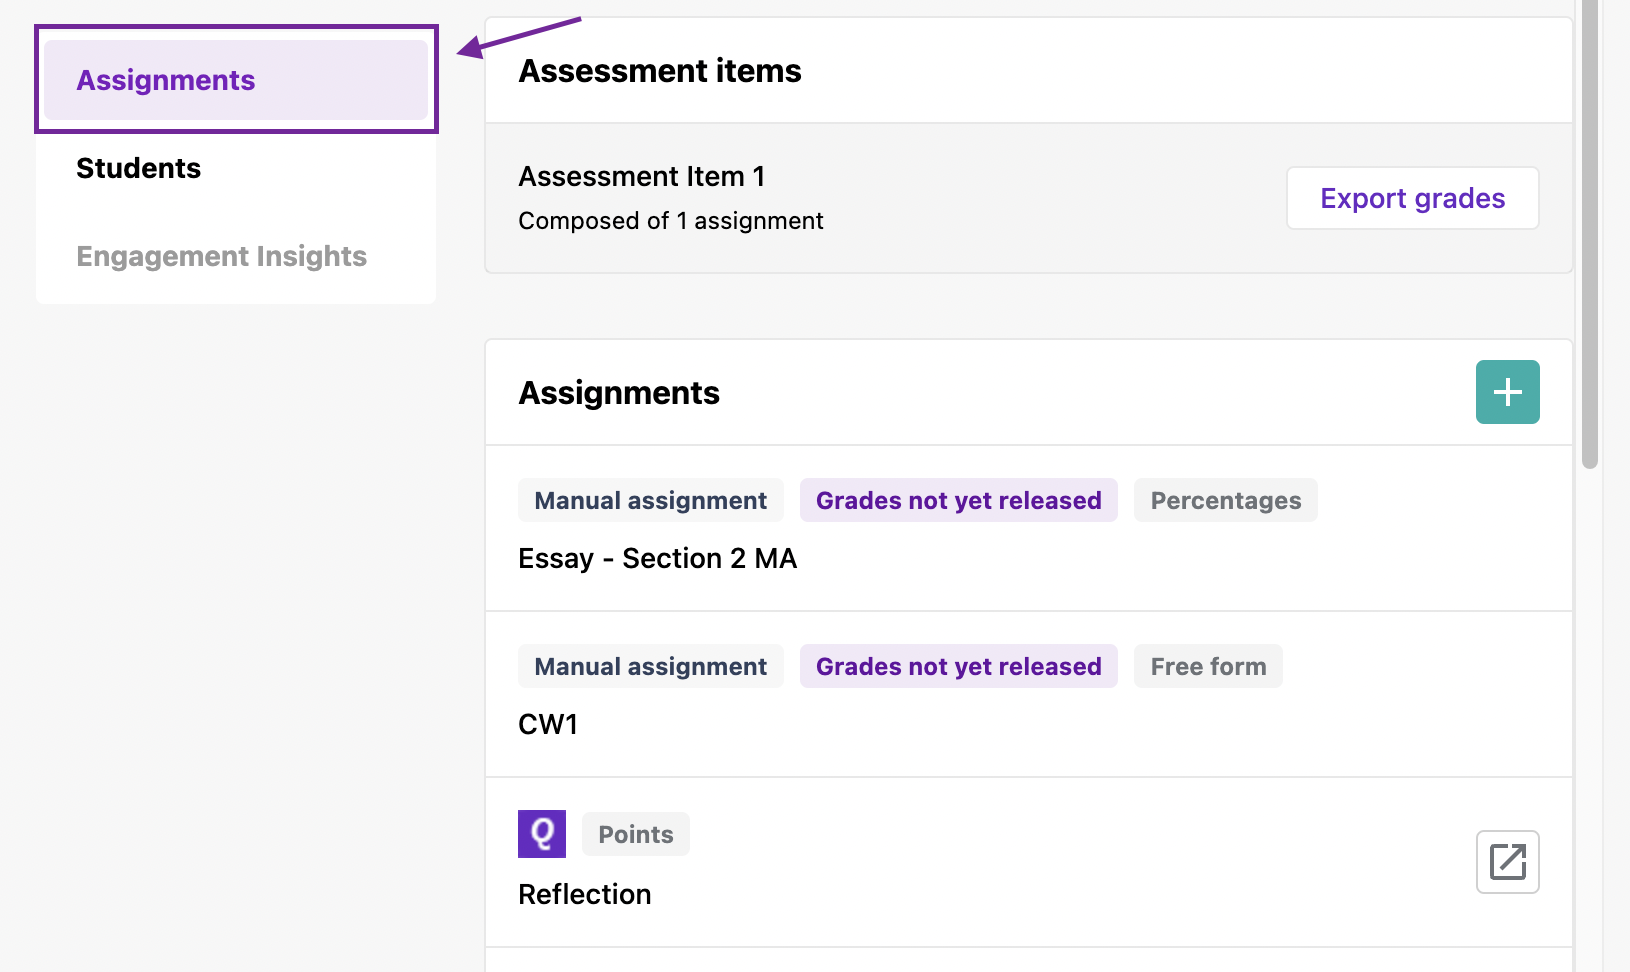 Screenshot highlighting Assignments in the ledt sidebar